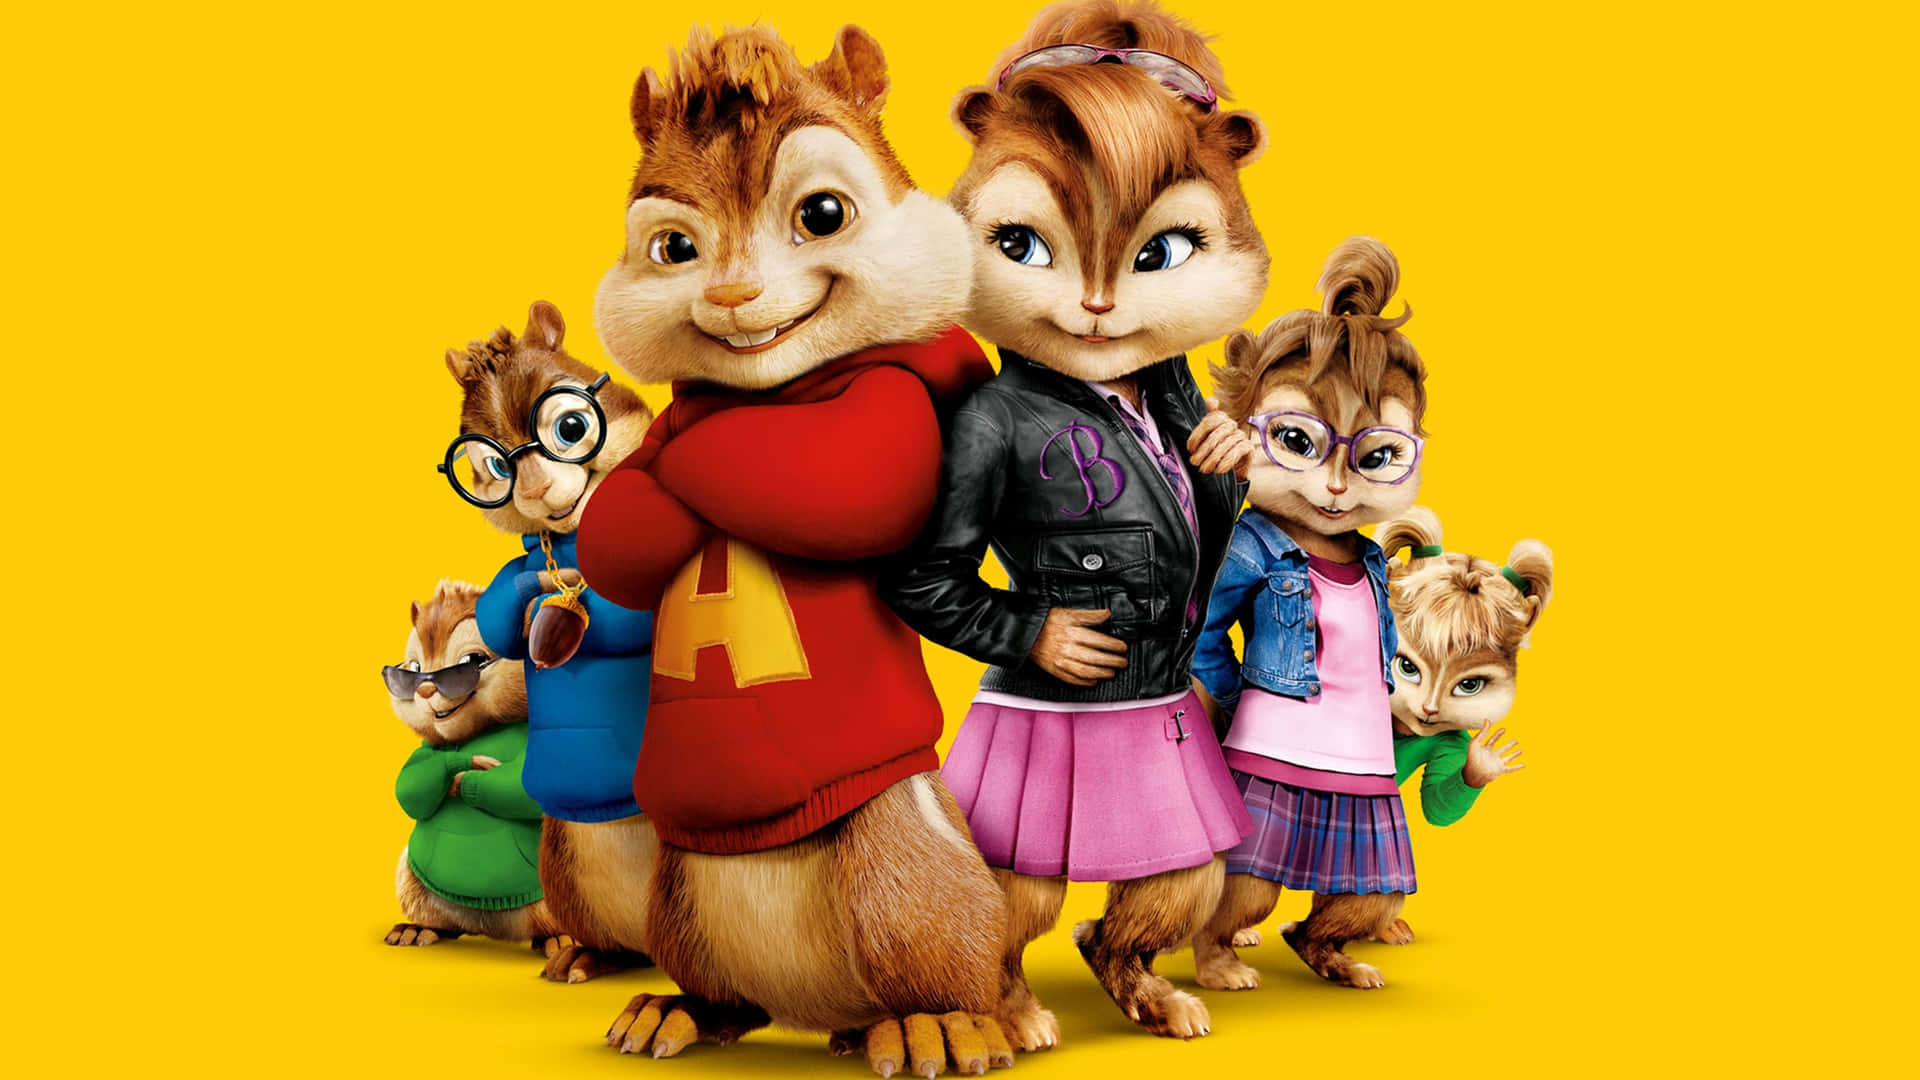 100+] Alvin And The Chipmunks Pictures 